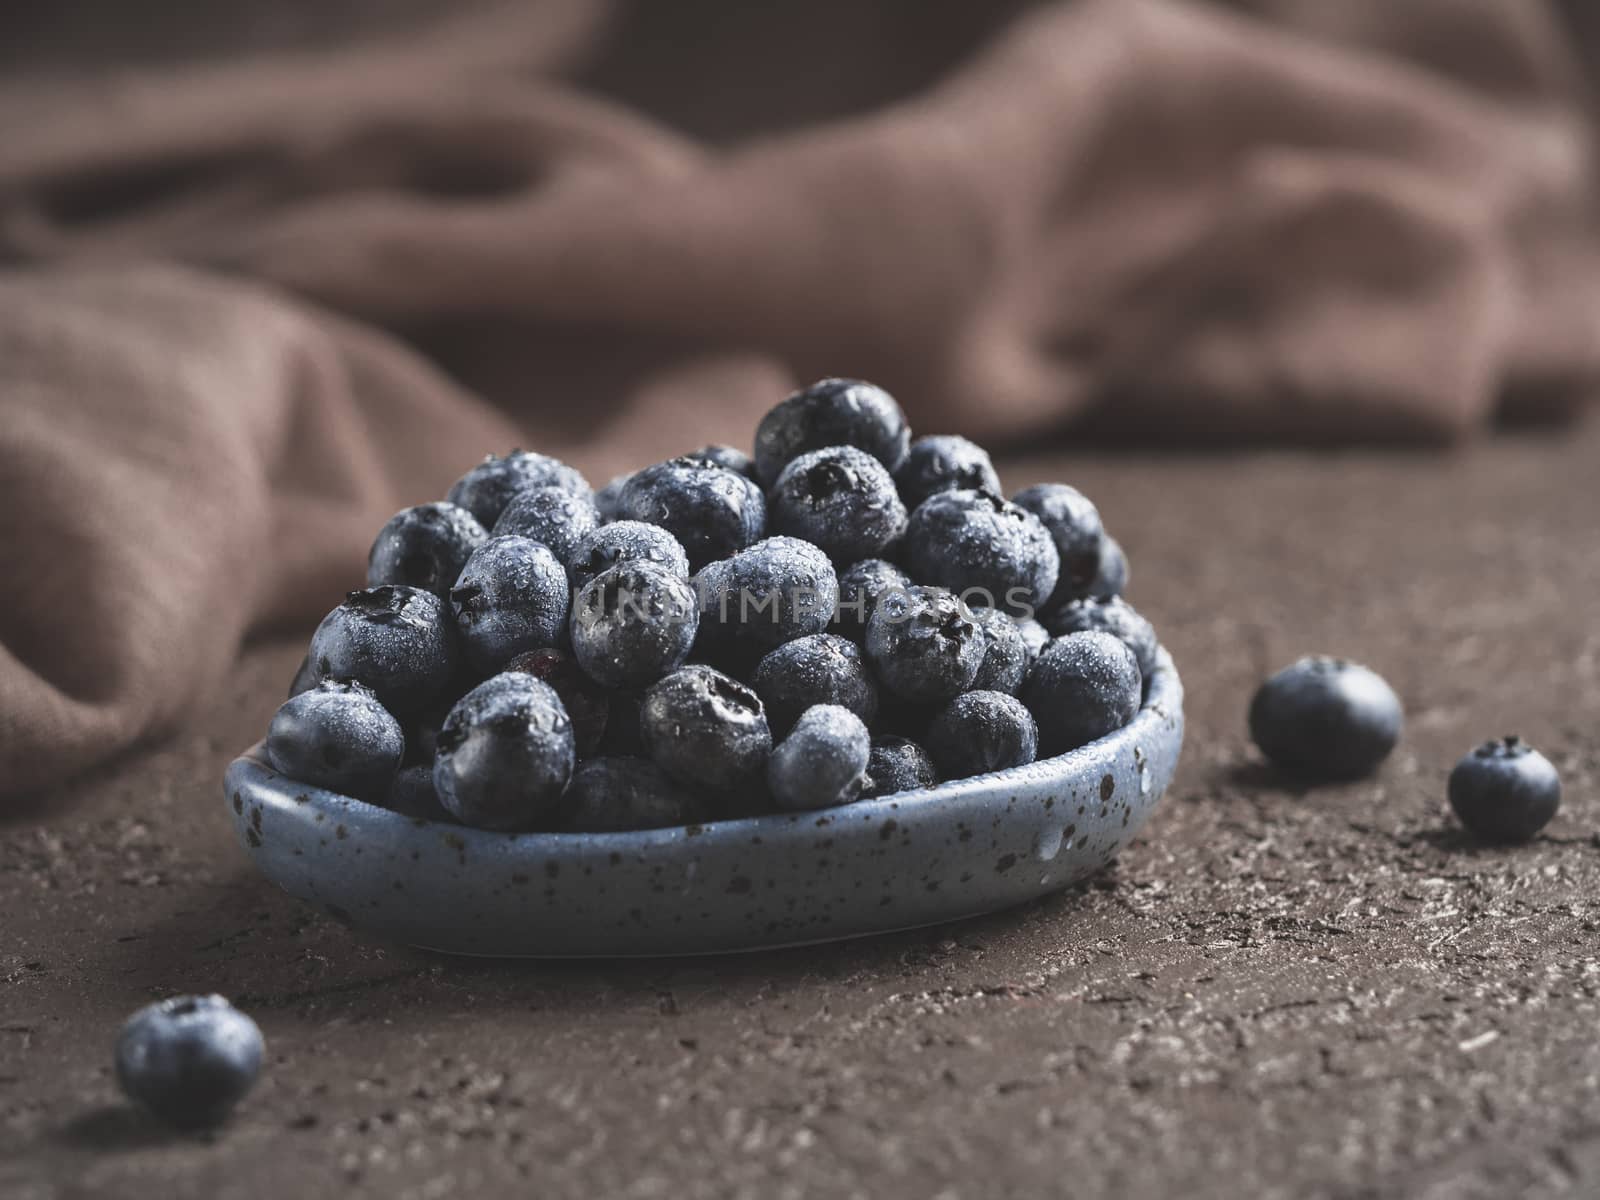 Blueberries in plate on brown concrete background. Fresh picked bilberries close up. Copyspace. Close up